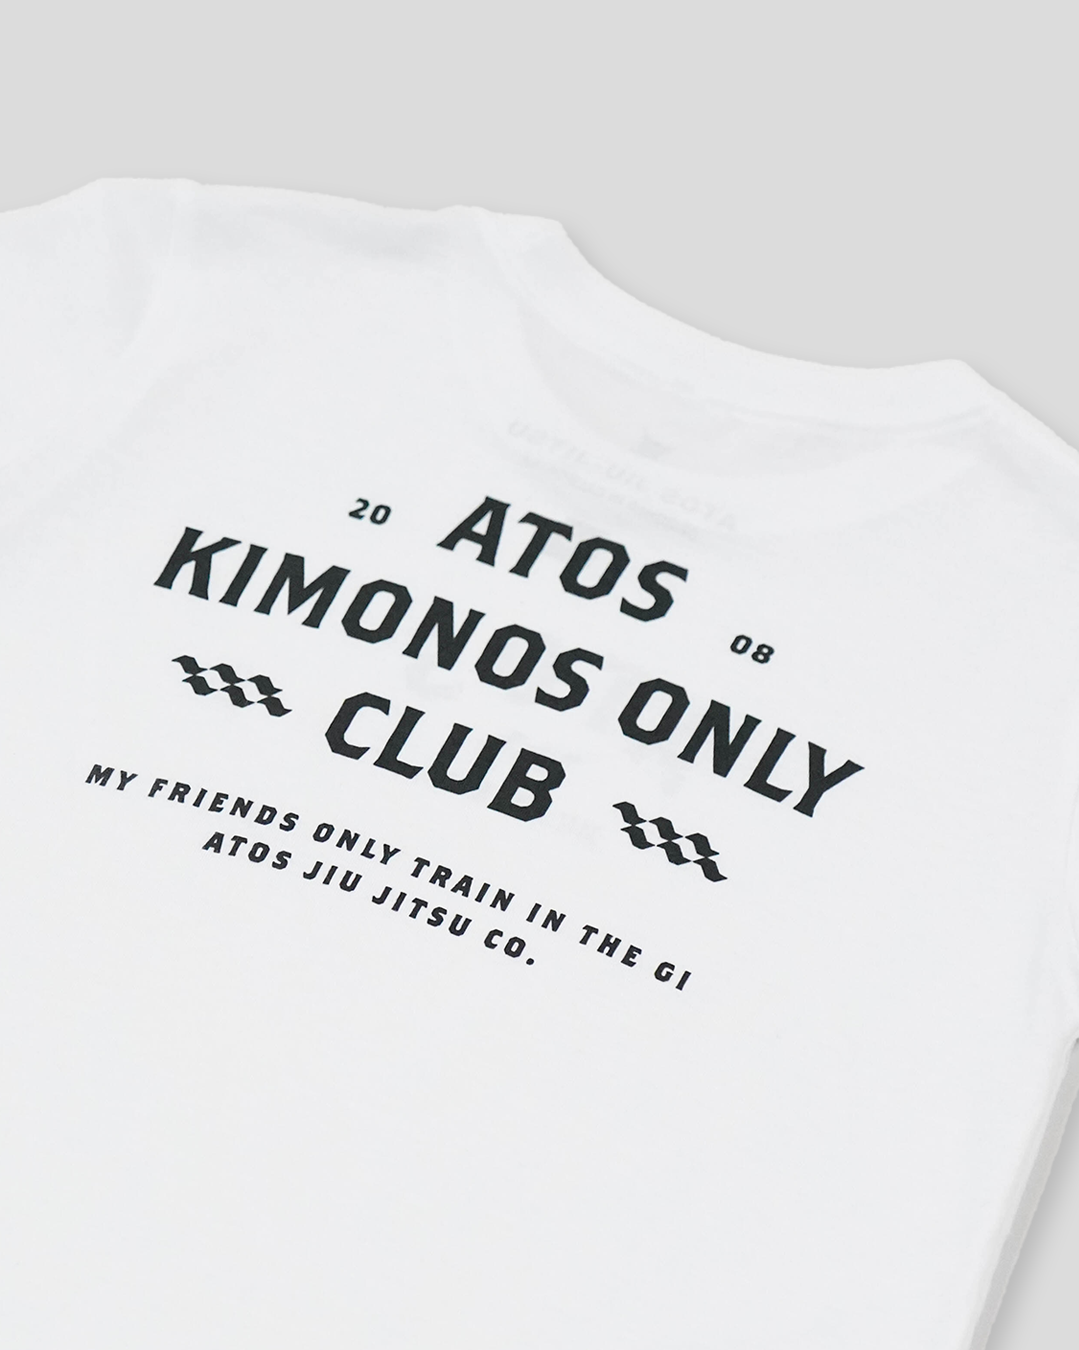 Kimonos Only T-Shirt (Youth)